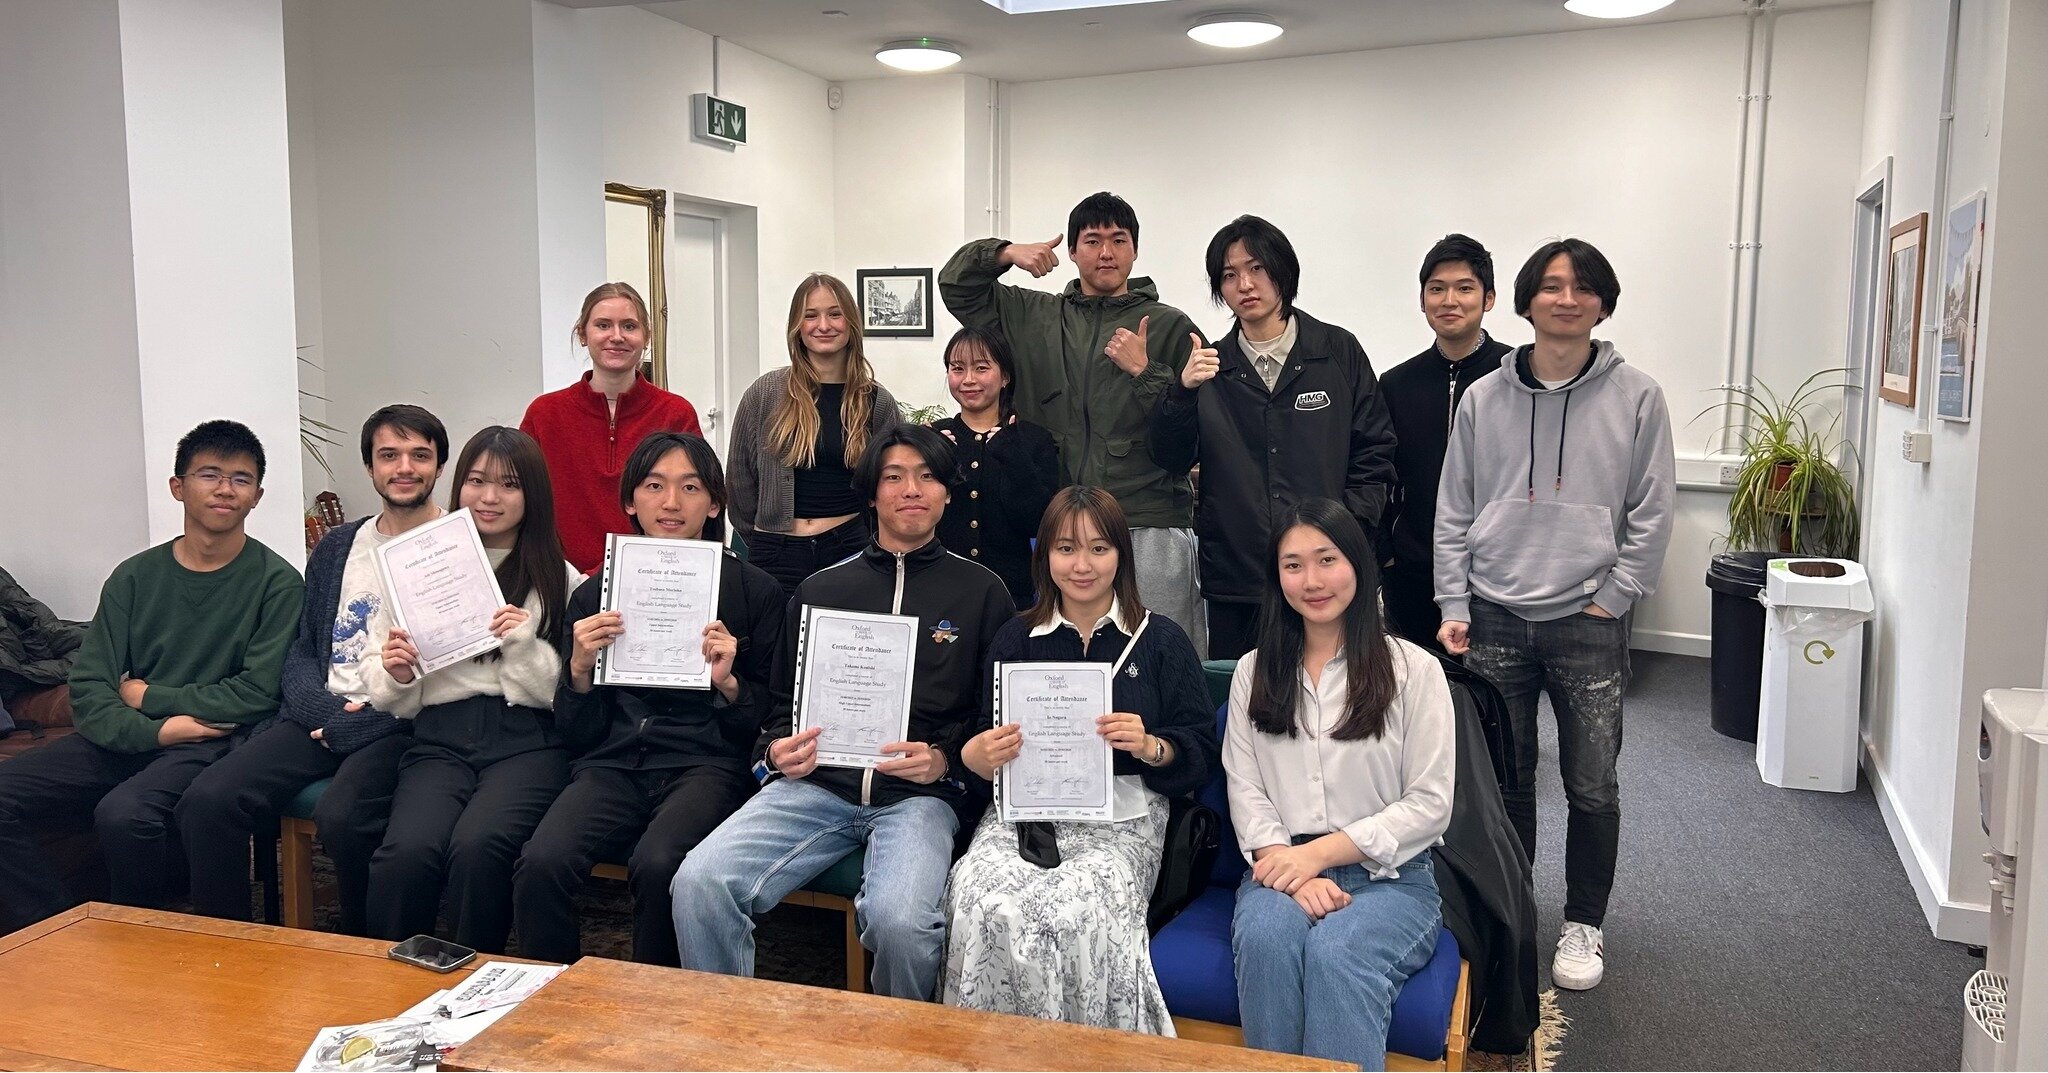 Happy Thursday✨🐣

Some photos of our leavers this week.. Long term student Takumi and shorter term students like Aoi, Io, Tsubasa, Anastasia, Lijie all leaving😢
Thank you all, and best of luck back home or wherever your next adventure may be! 

Hap